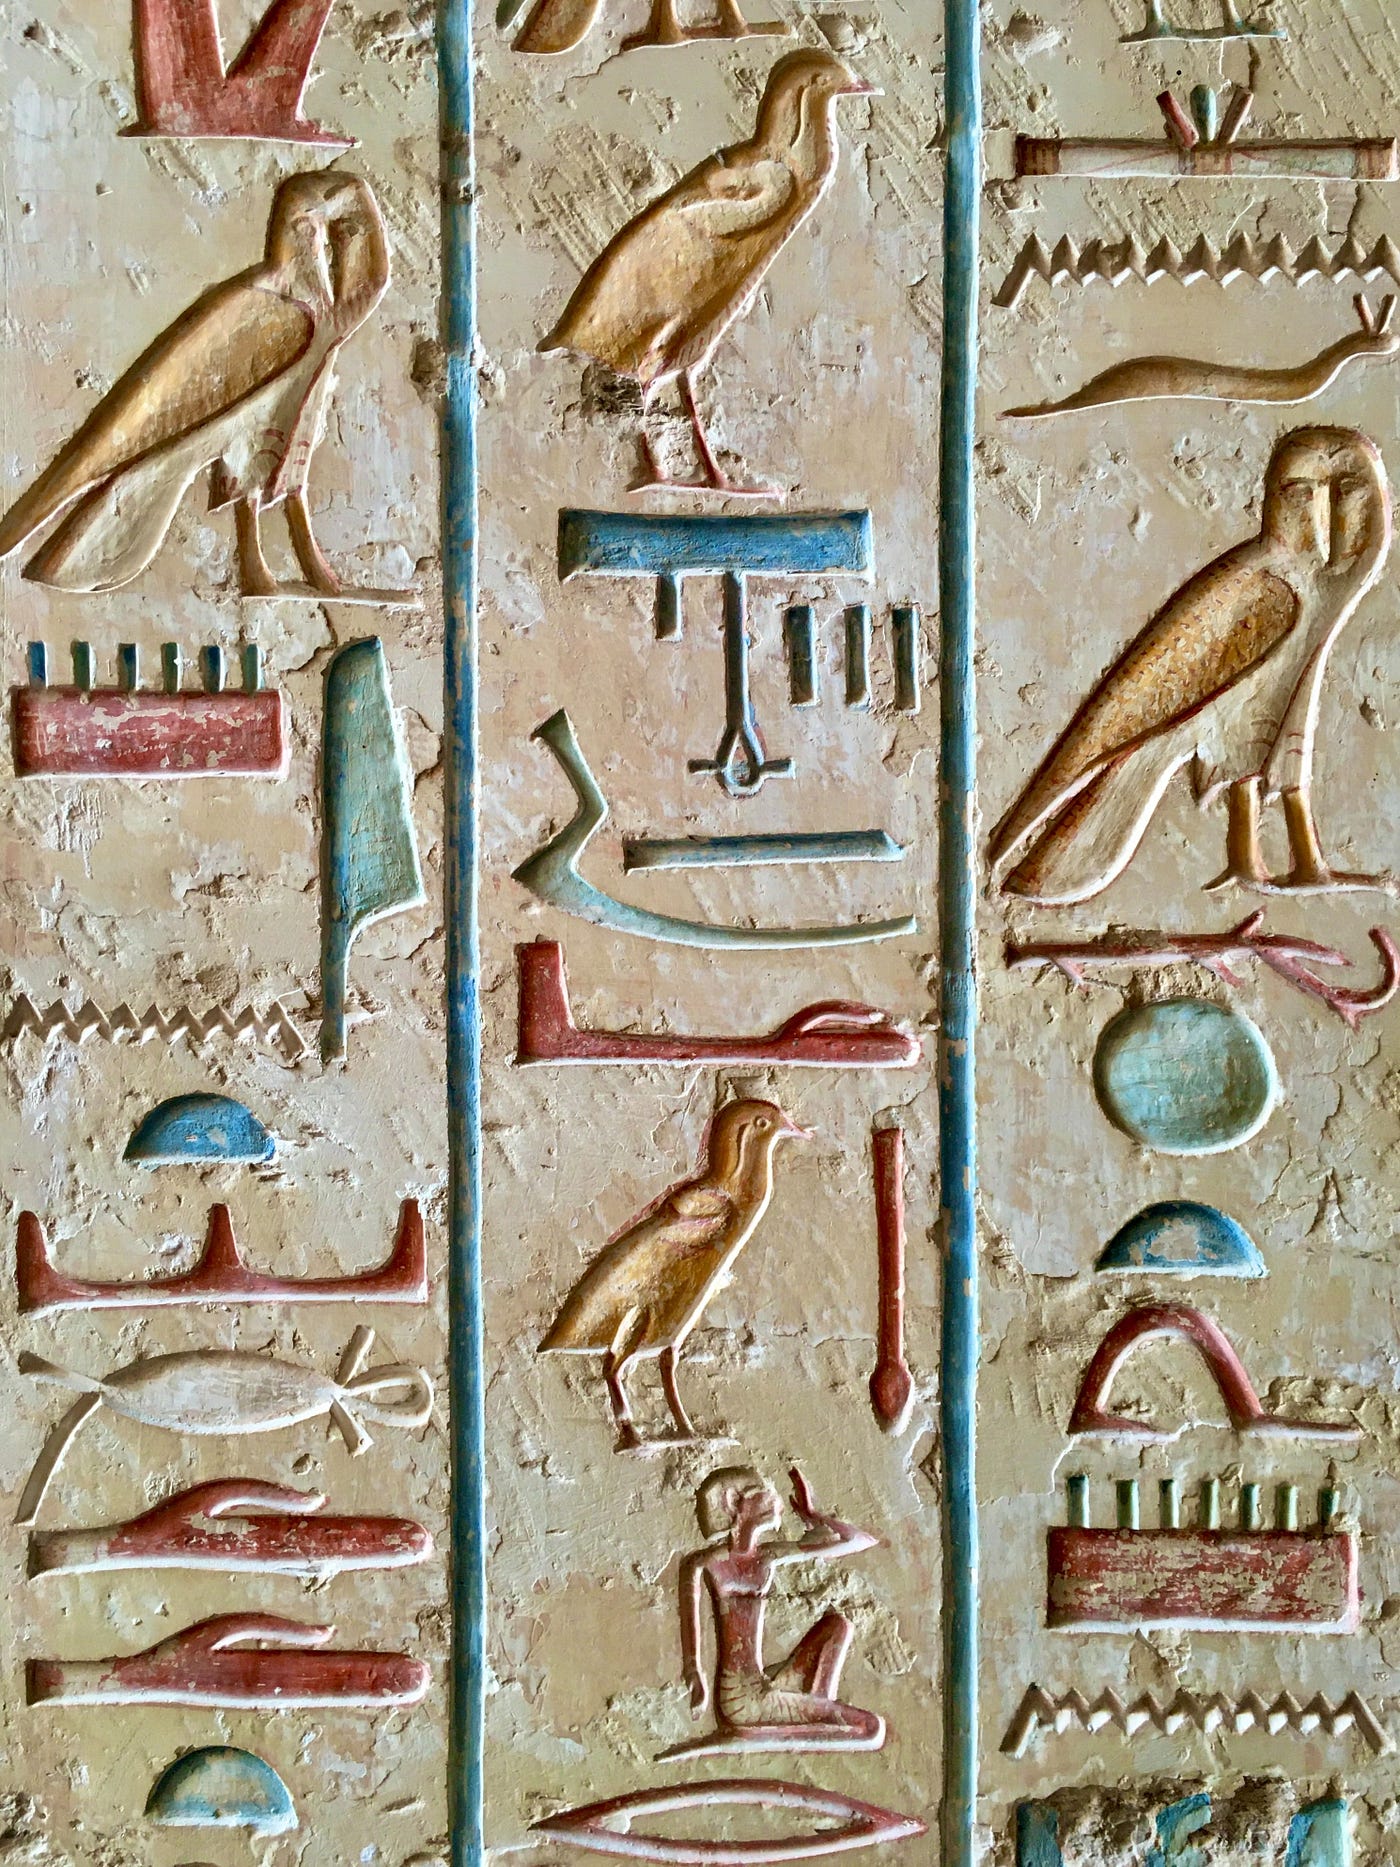 hieroglyphic symbols and what they mean